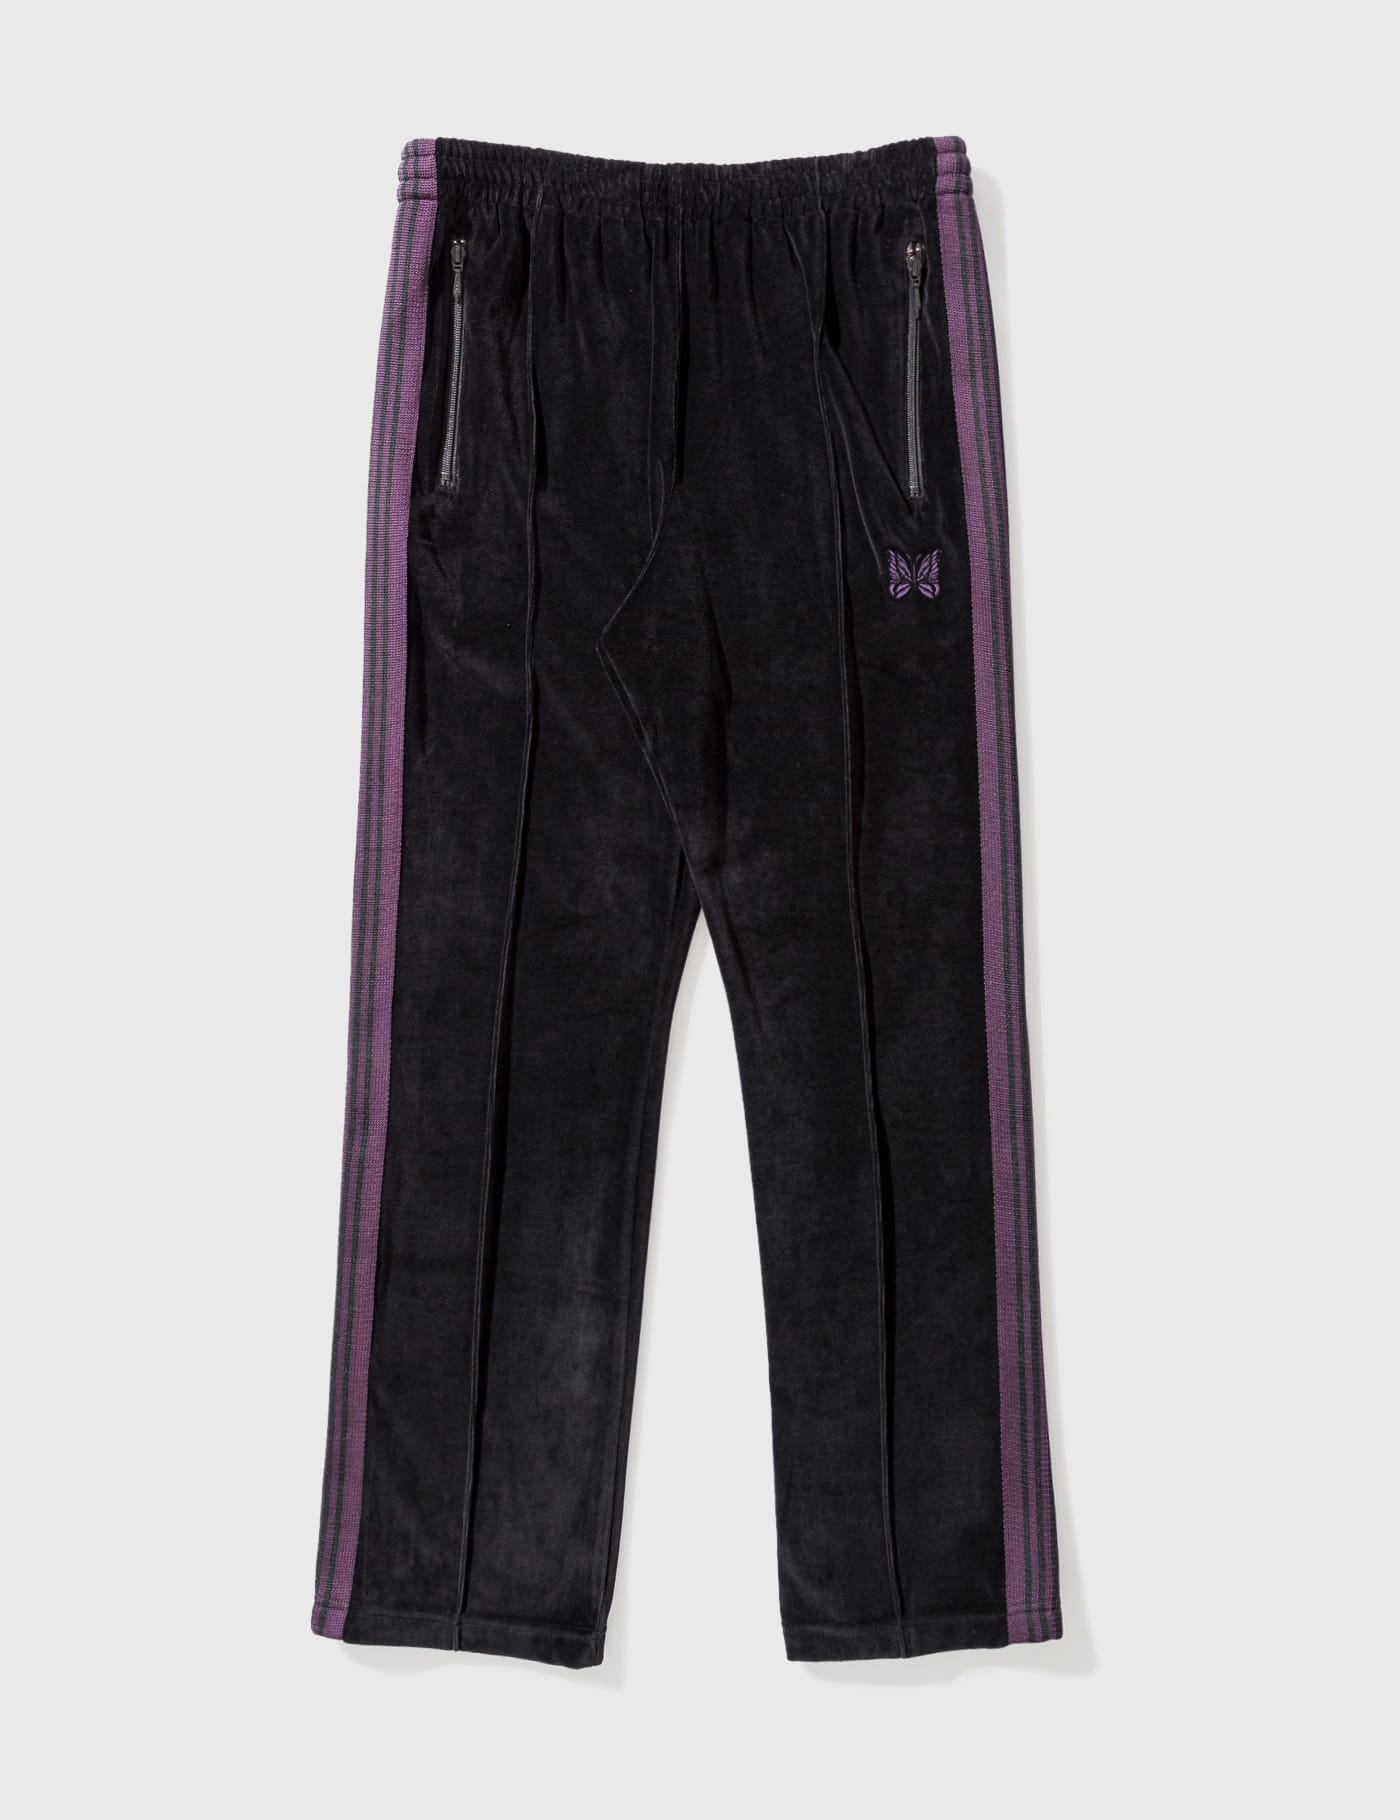 Needles - Velour Narrow Track Pant | HBX - Globally Curated 